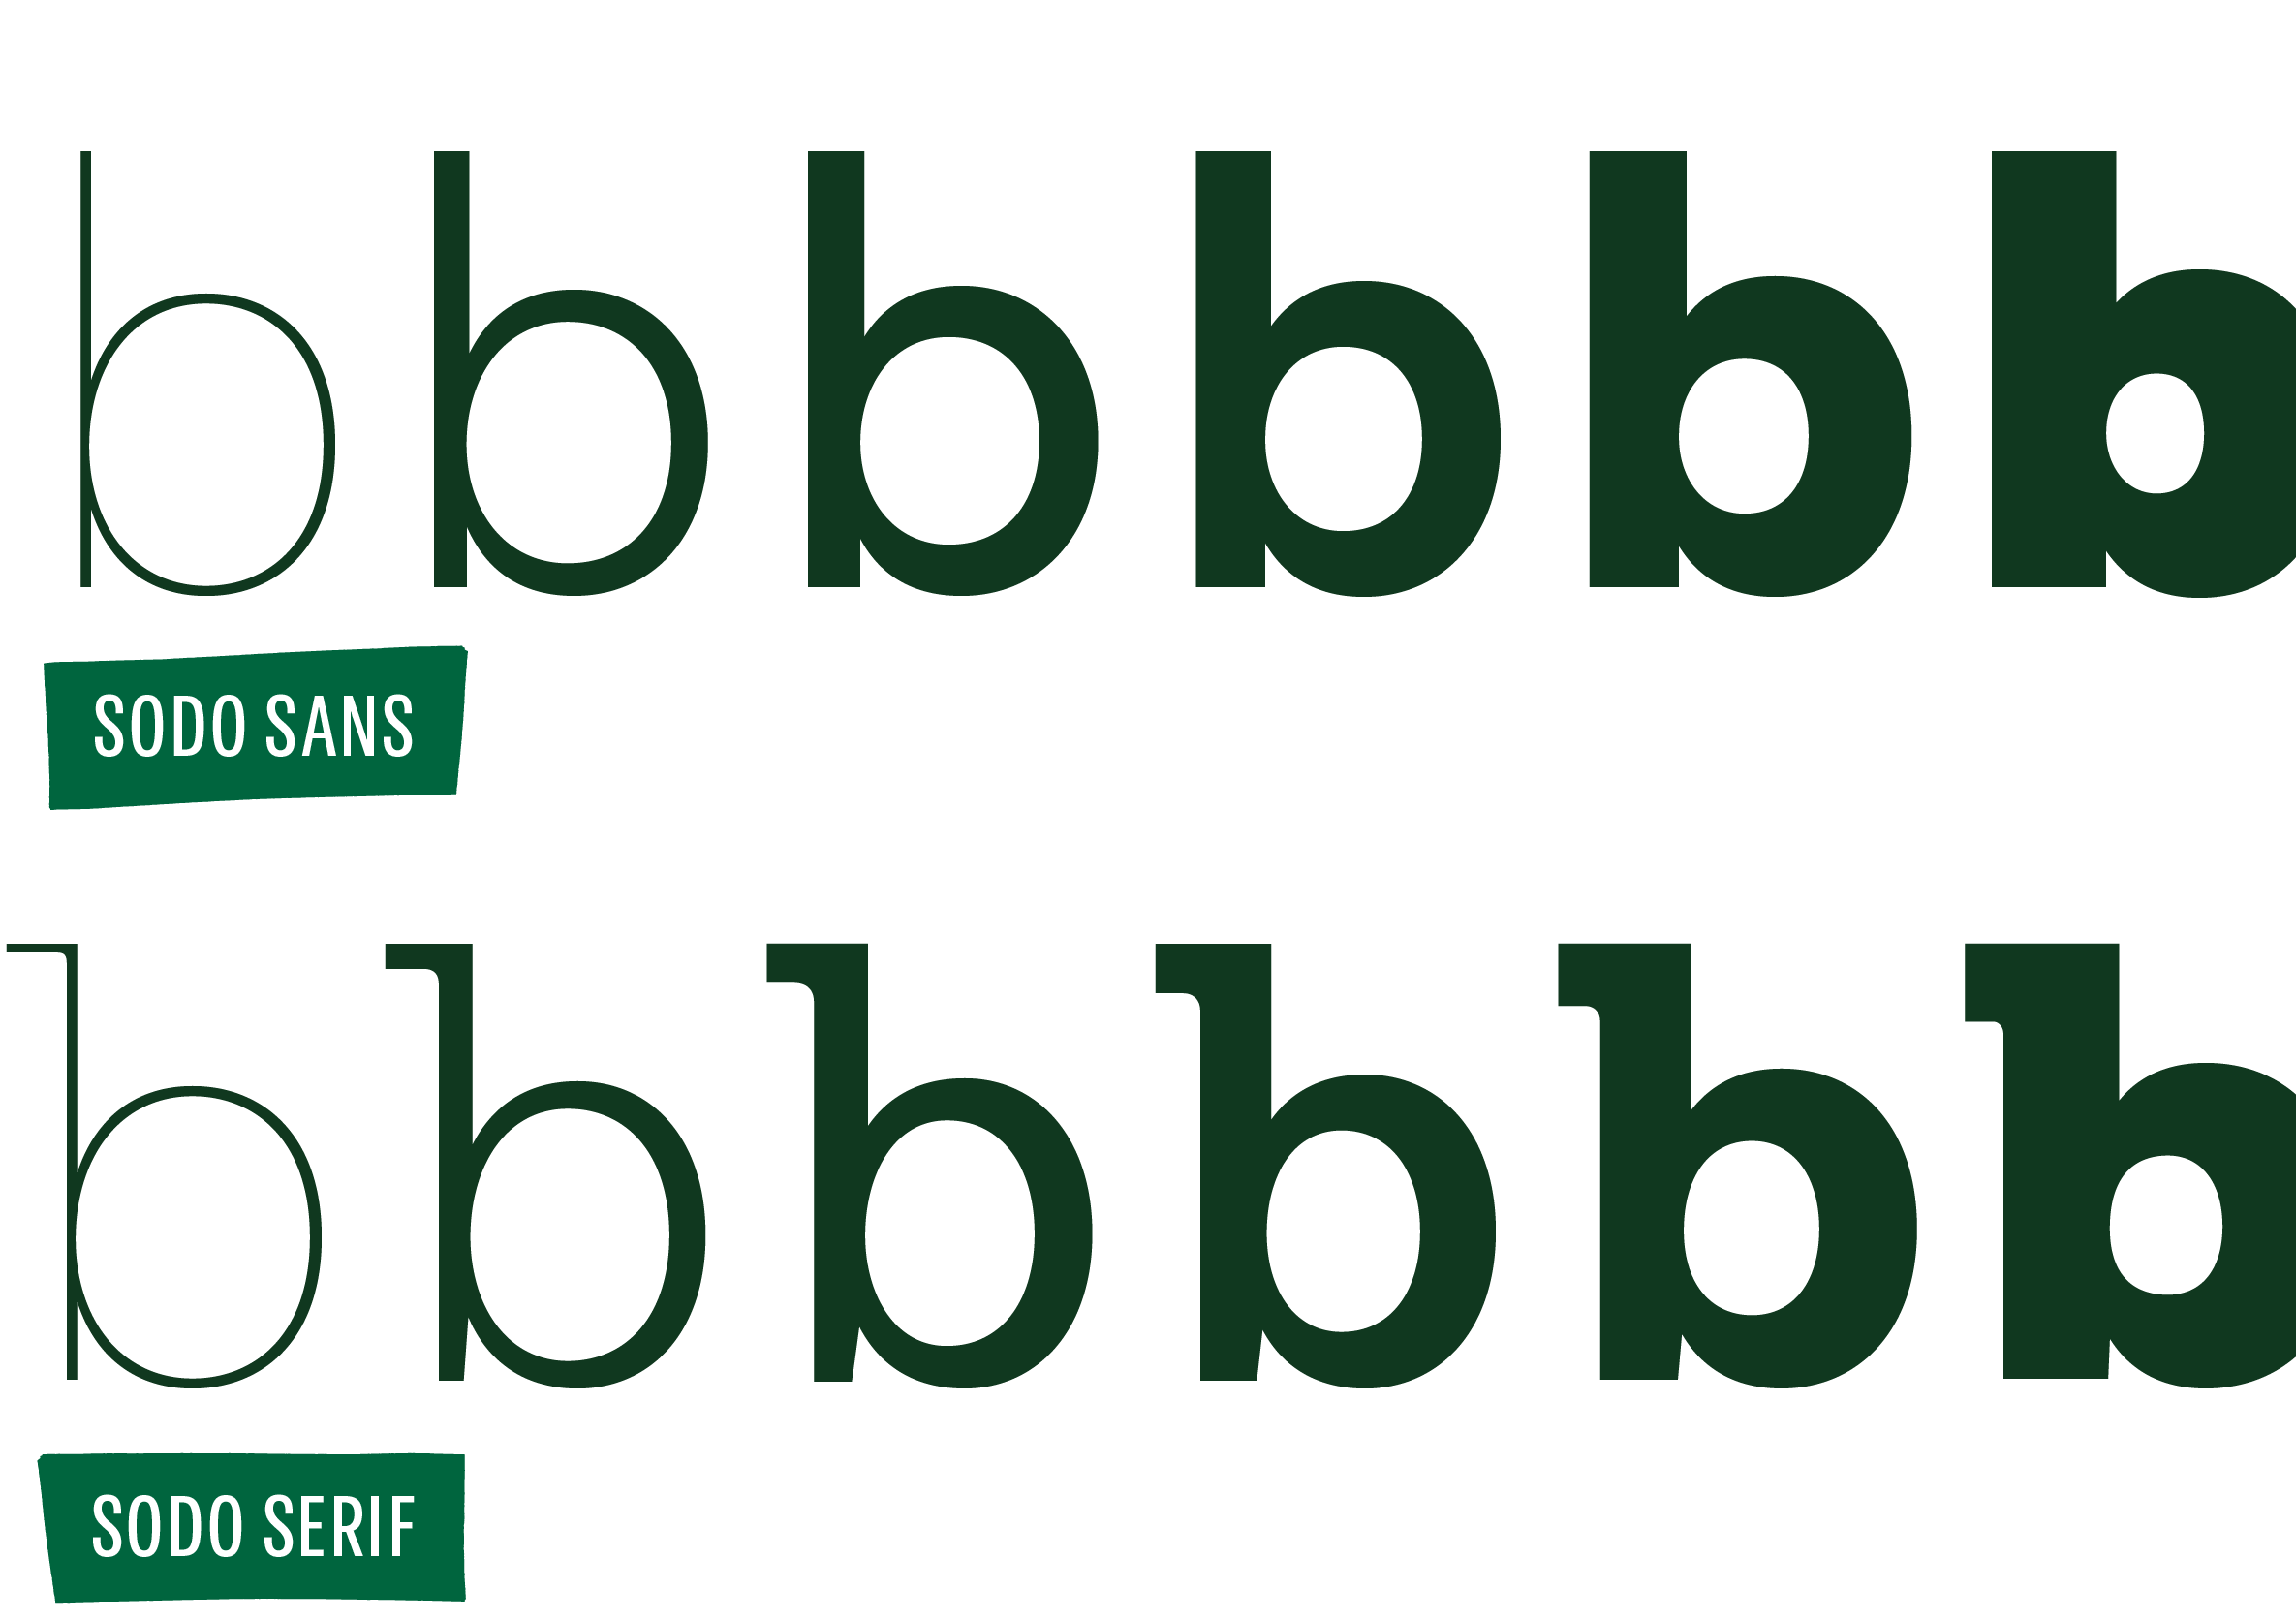 <b class="accent">FIG. 5 — </b> A comparison of details in SoDo Sans and SoDo Serif.